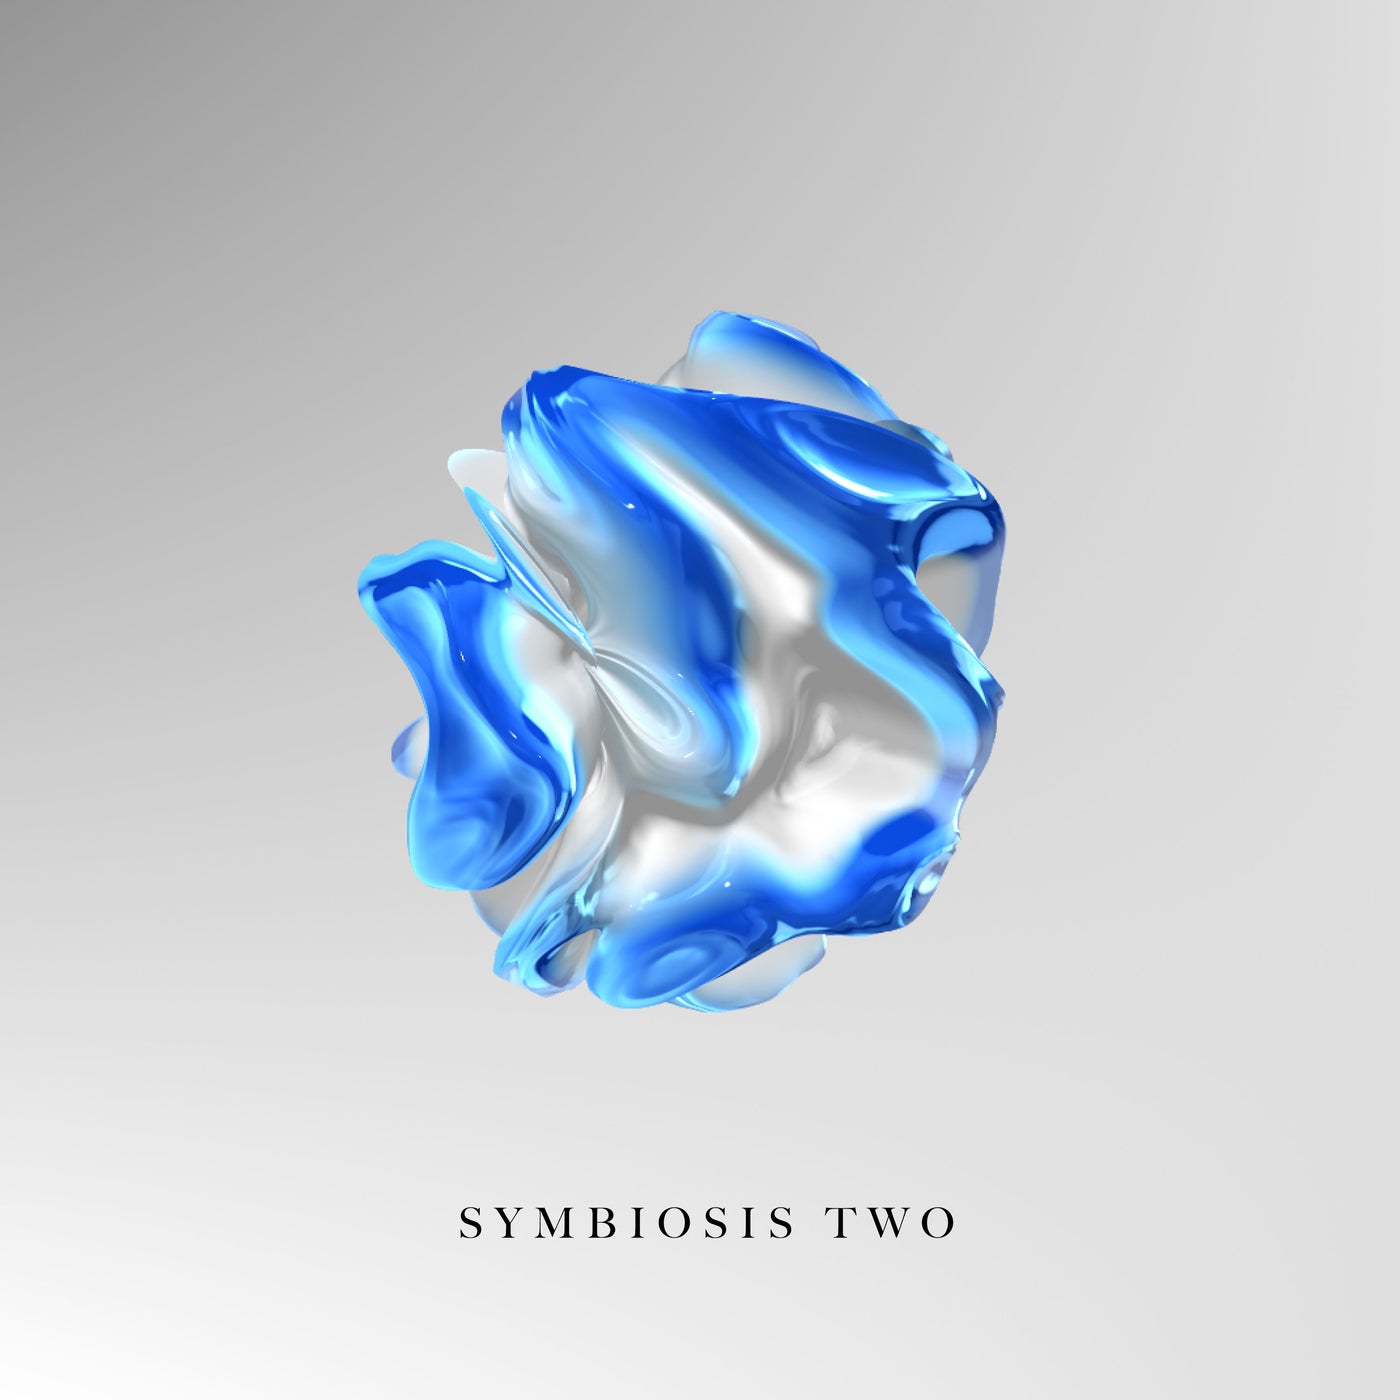 Symbiosis Two